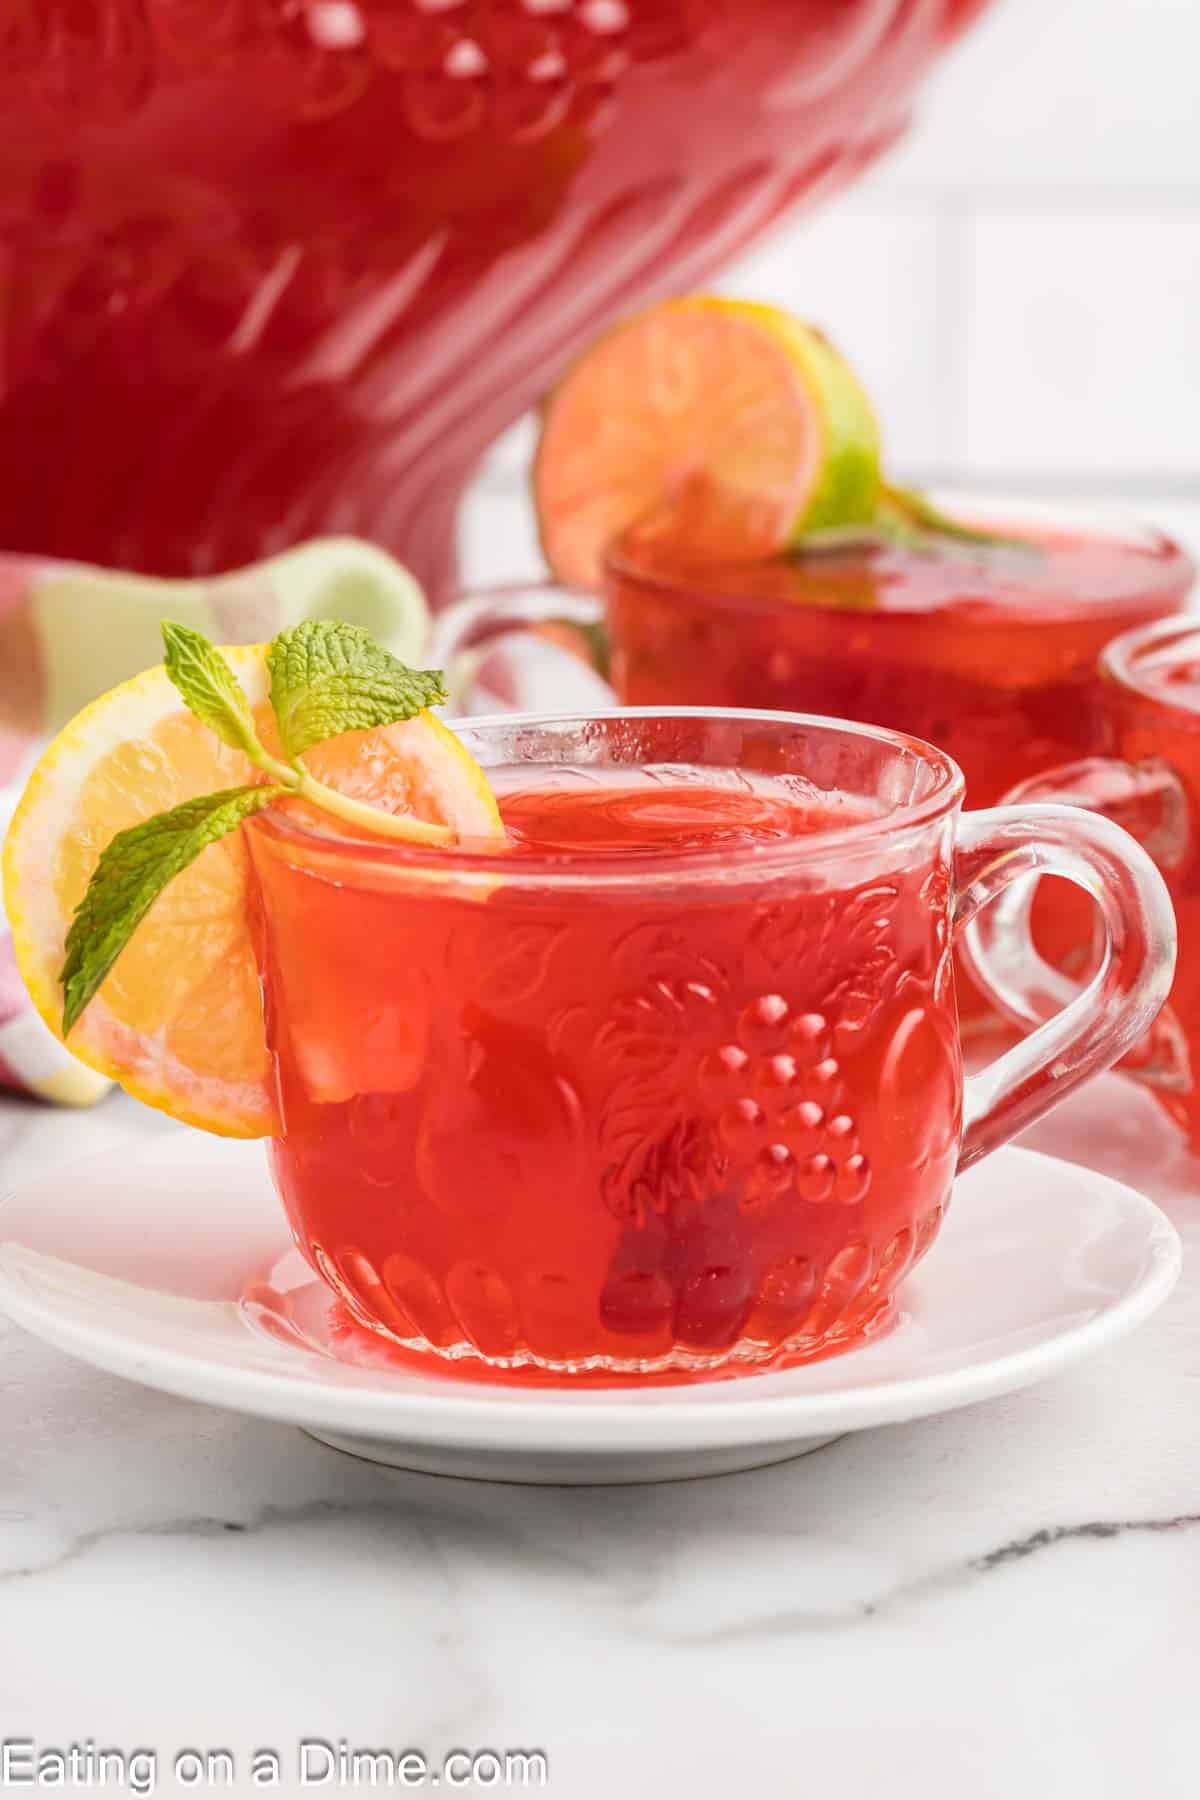 A clear glass mug with punch and garnished with lemon slices and mint